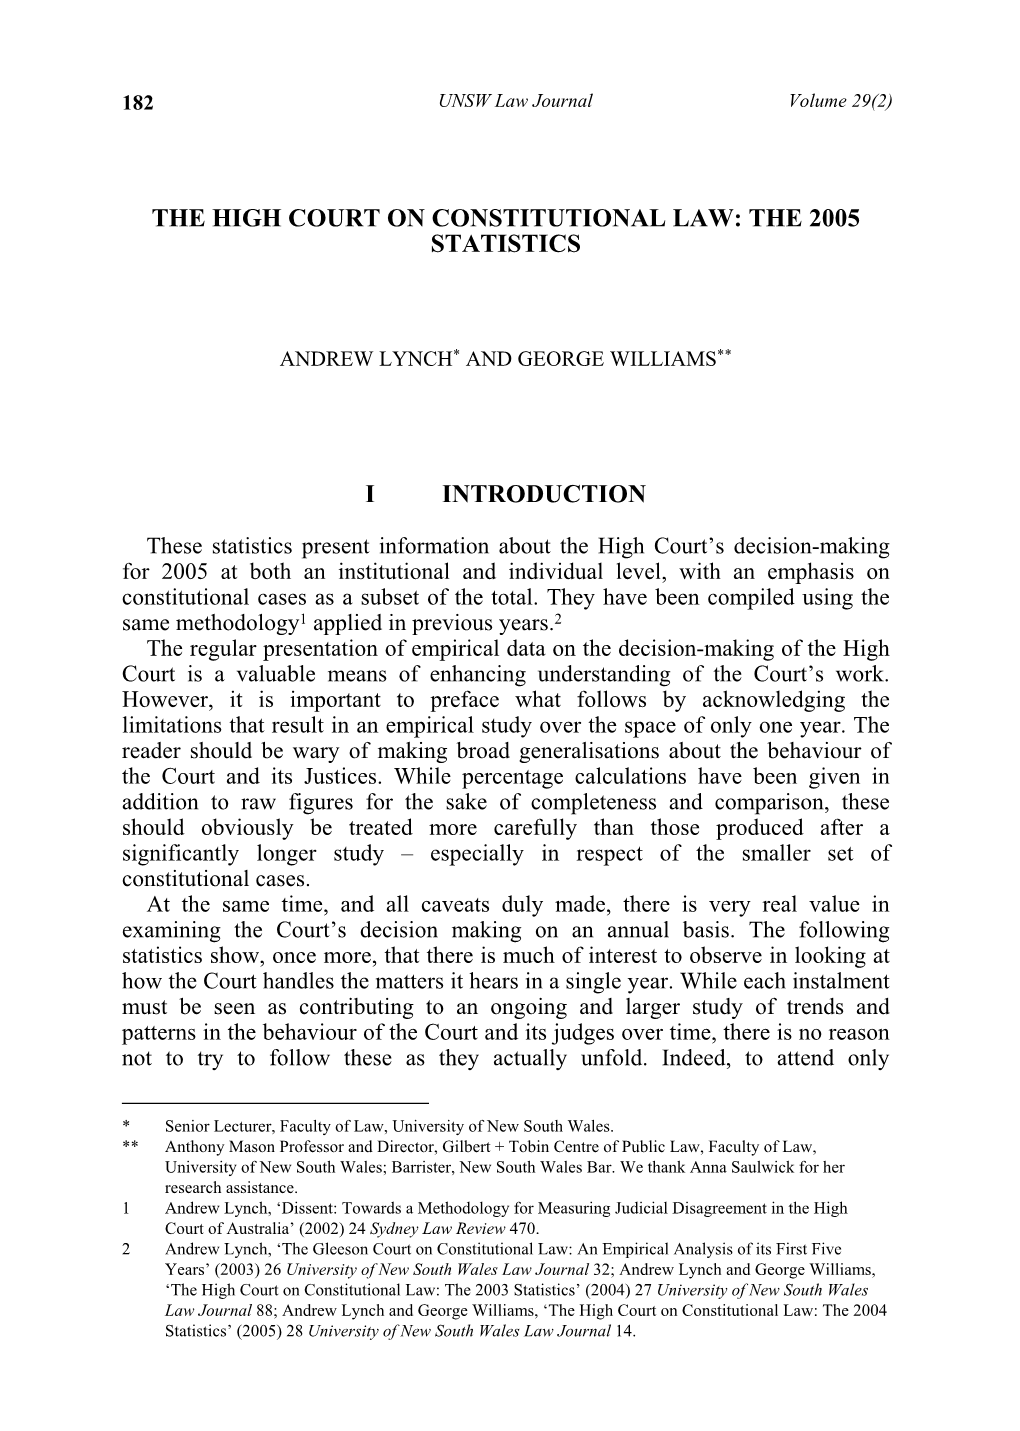 The High Court on Constitutional Law: the 2005 Statistics